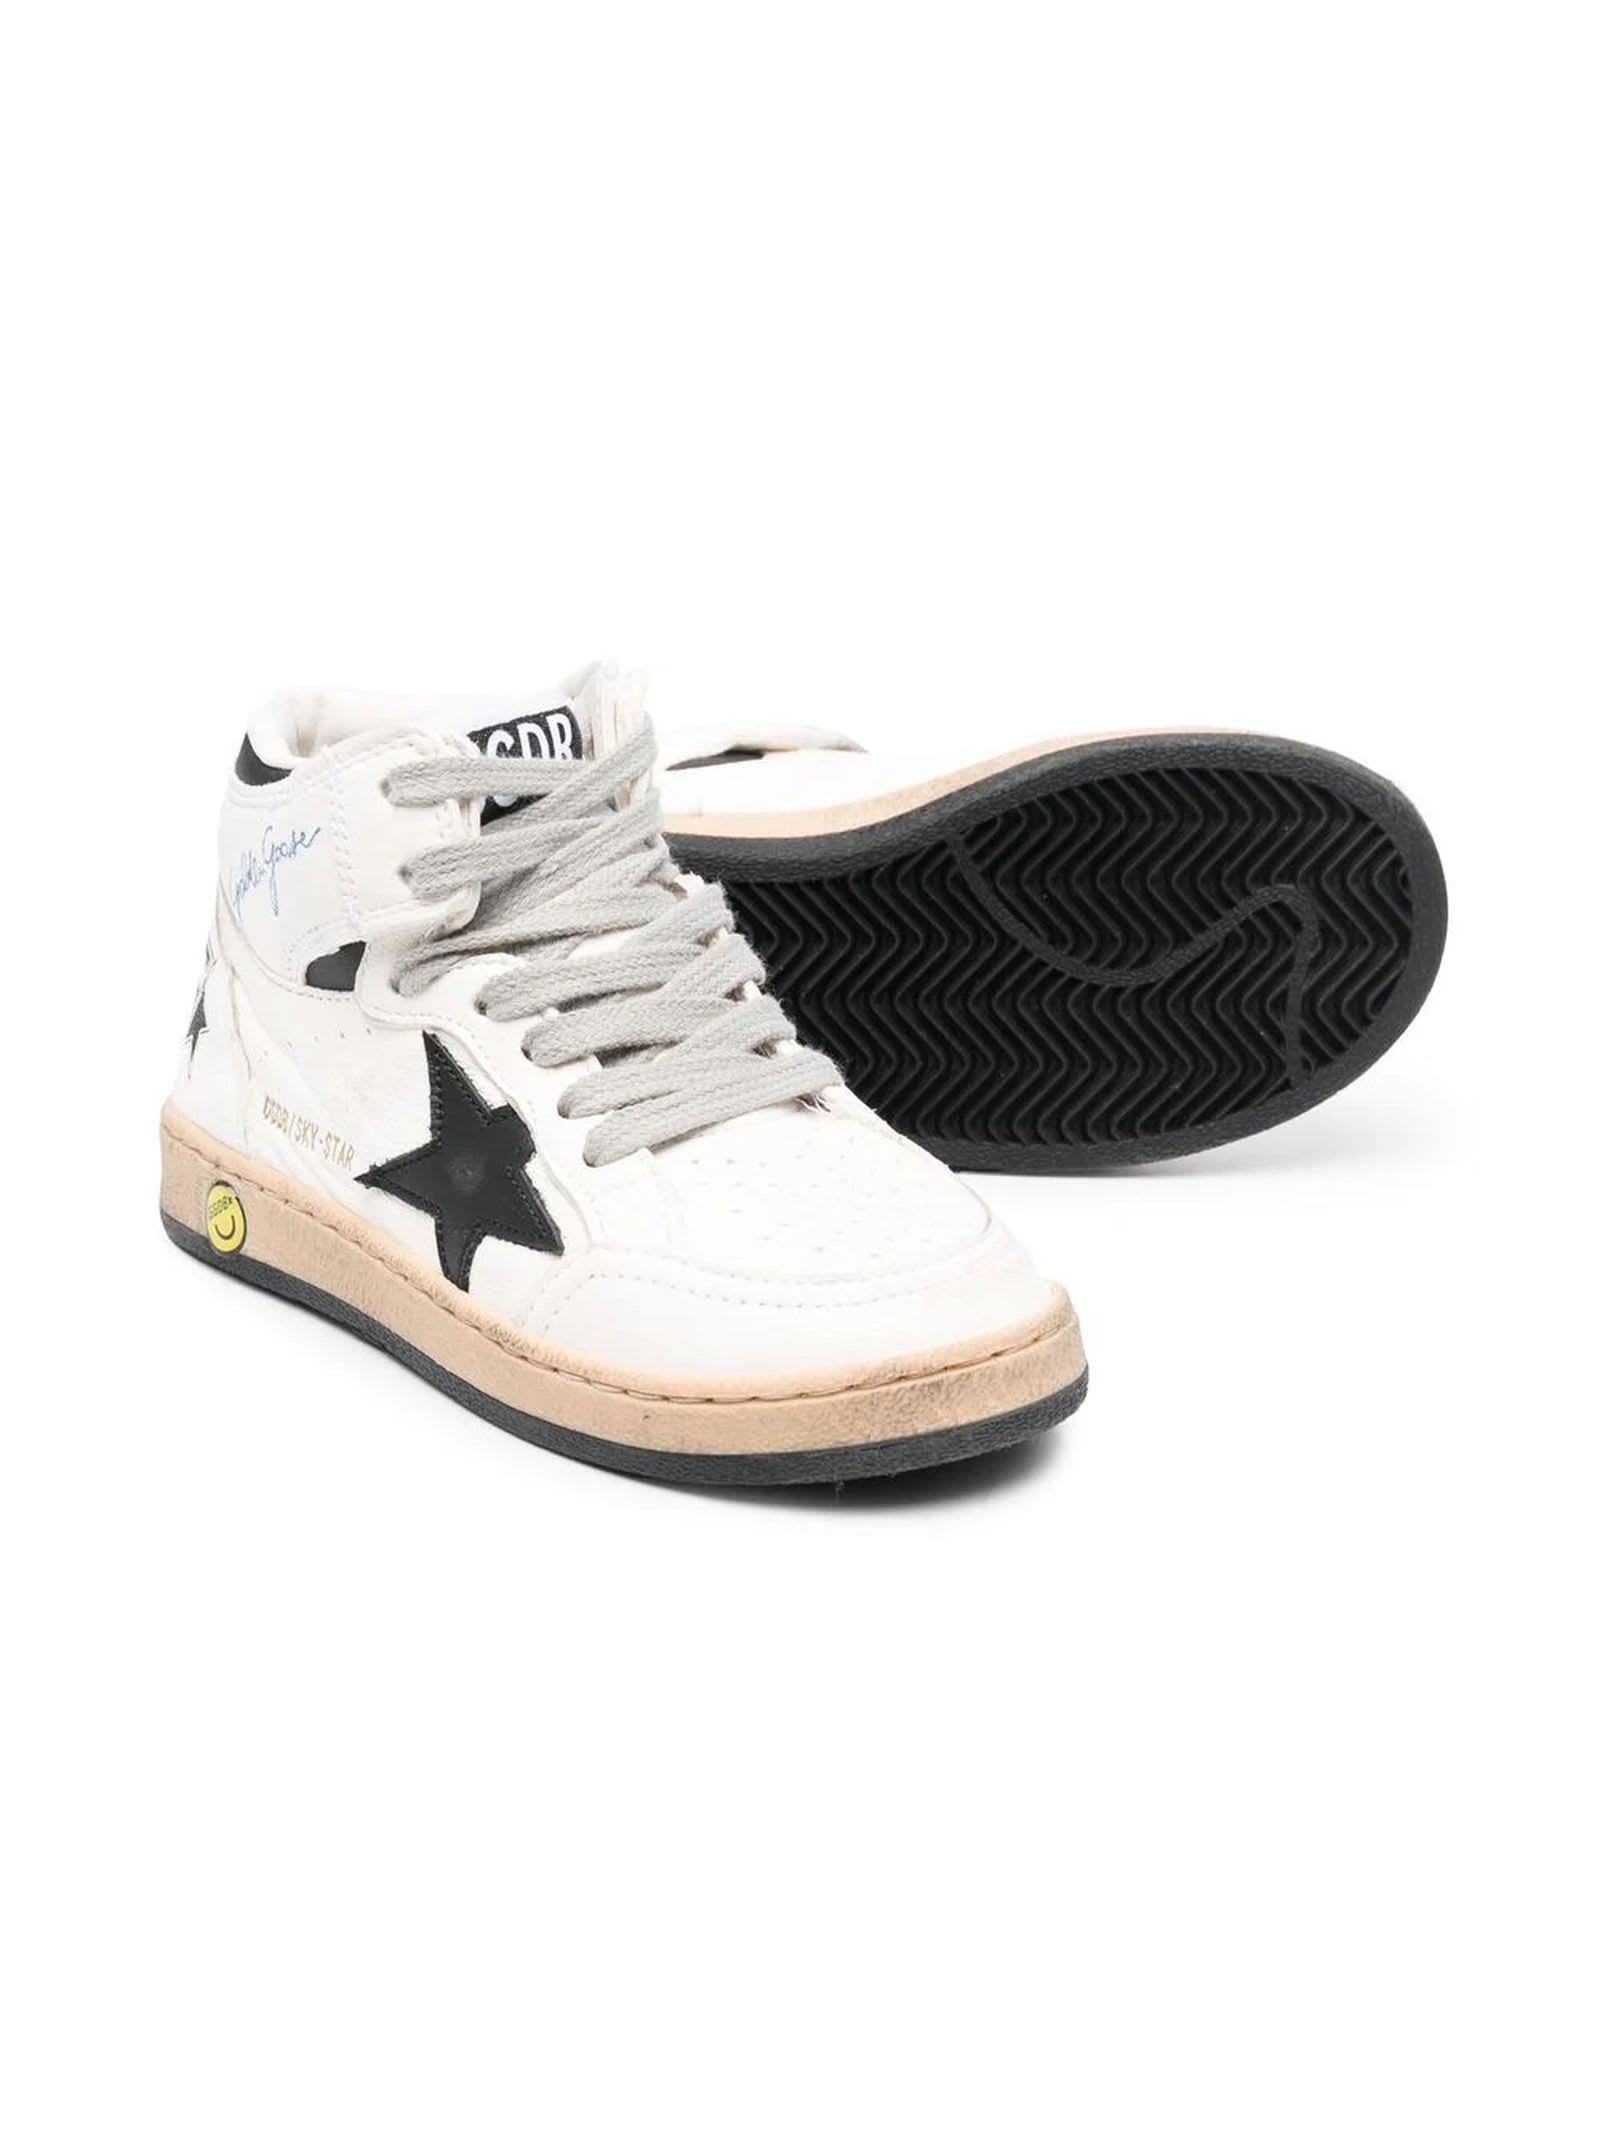 Shop Golden Goose White Calf Leather Sneakers In White/black